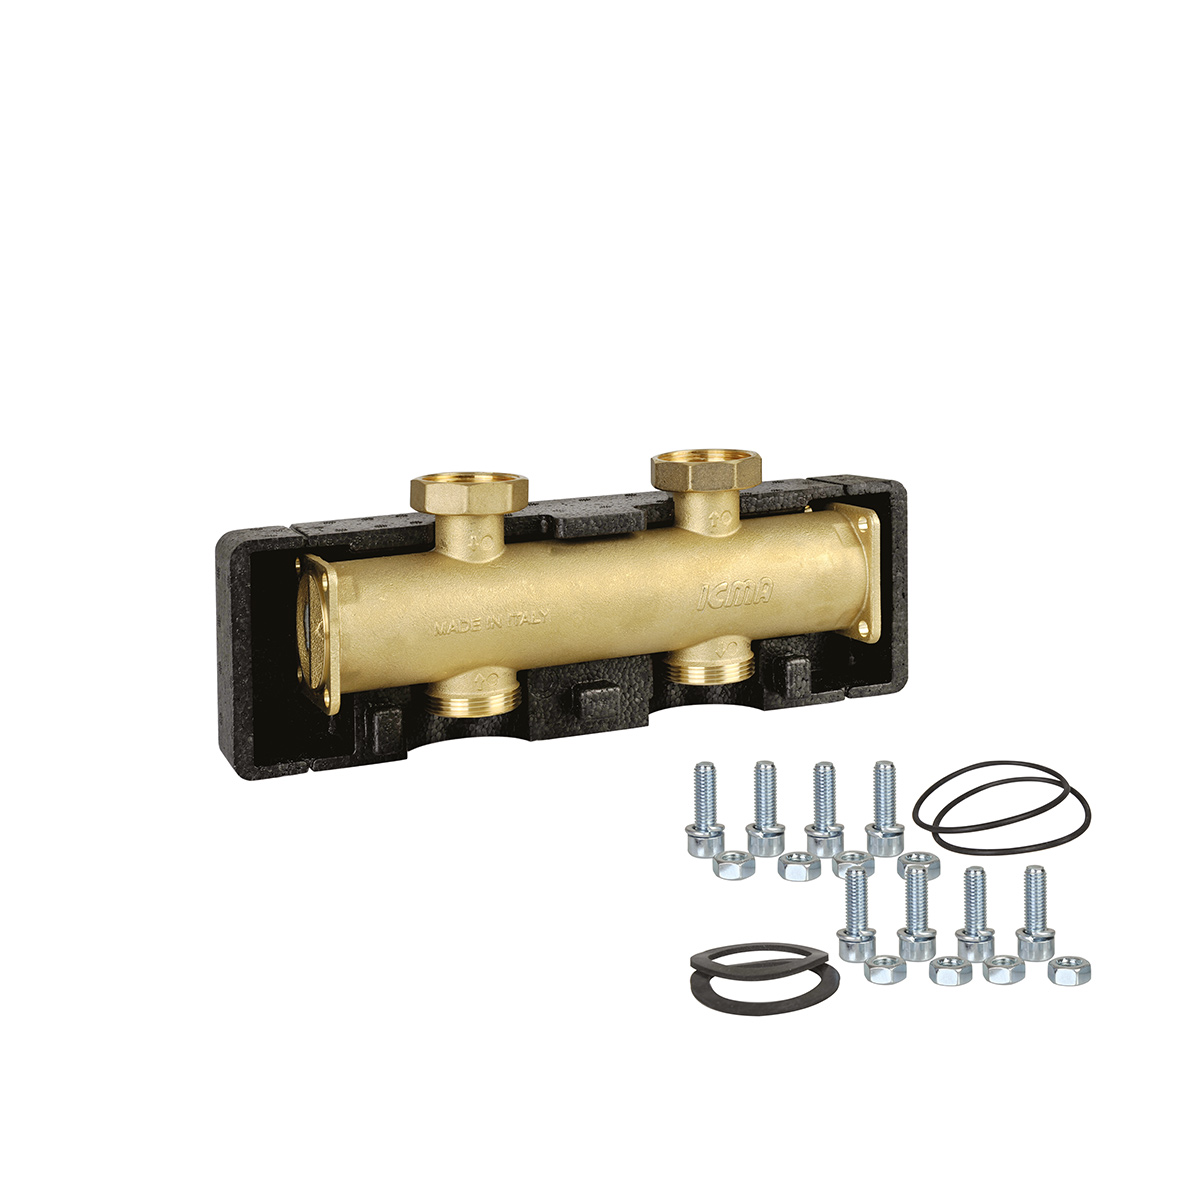 Modular brass manifold with double chamber